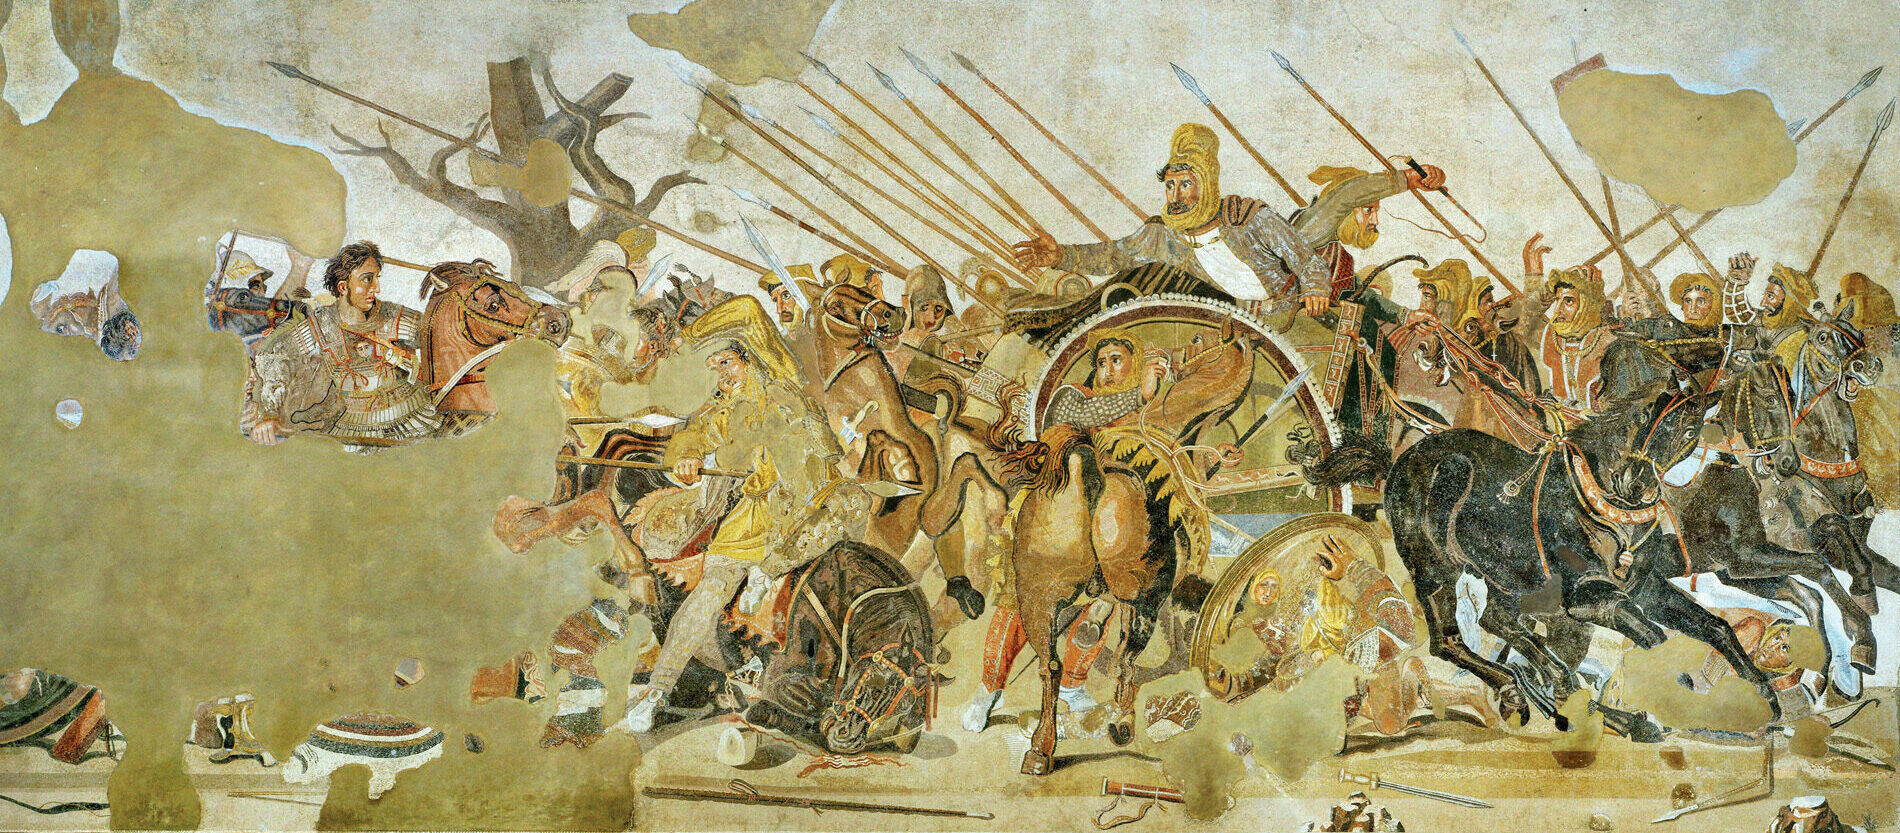 A Roman mosaic from Pompeii is believed to represent the Battle of Issus with Alexander at left pursuing Darius, who is fleeing the battlefield in his chariot. Although he did not capture or slay Darius at Issus, Alexander did return to the battlefield with Darius’s abandoned chariot, shield, cloak, and bow.